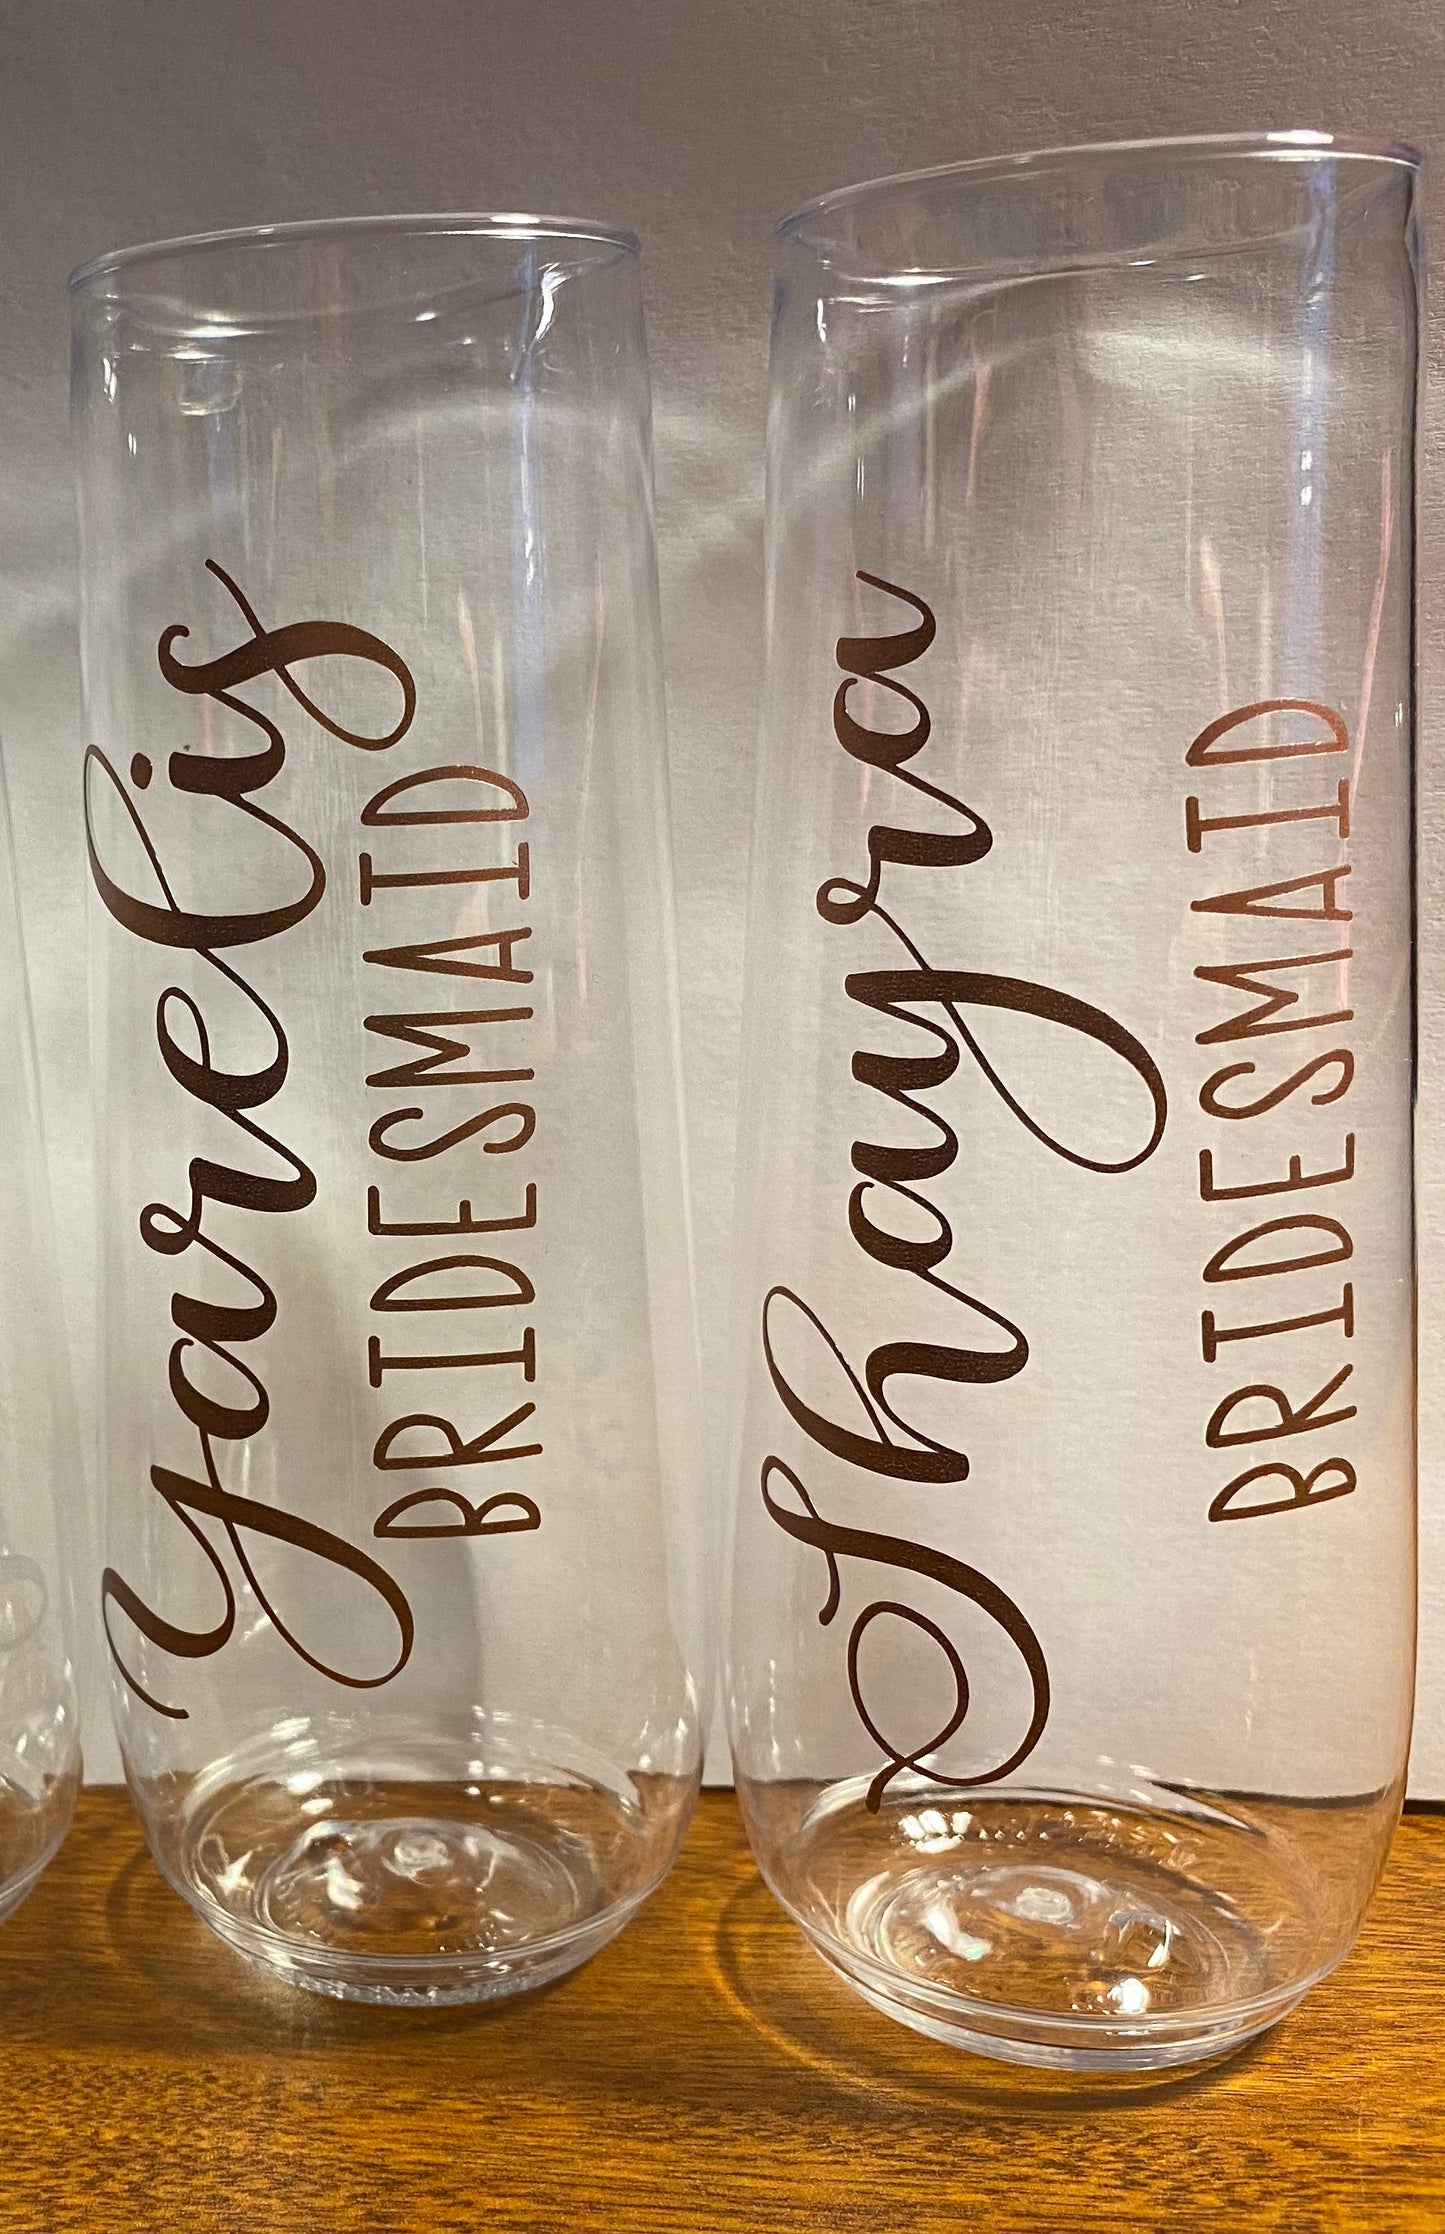 Bridal Party gift - personalized 9oz Plastic Champagne Flute - Bridesmaid, Maid of Honor, Wedding Party, Birthday, Events, ect.